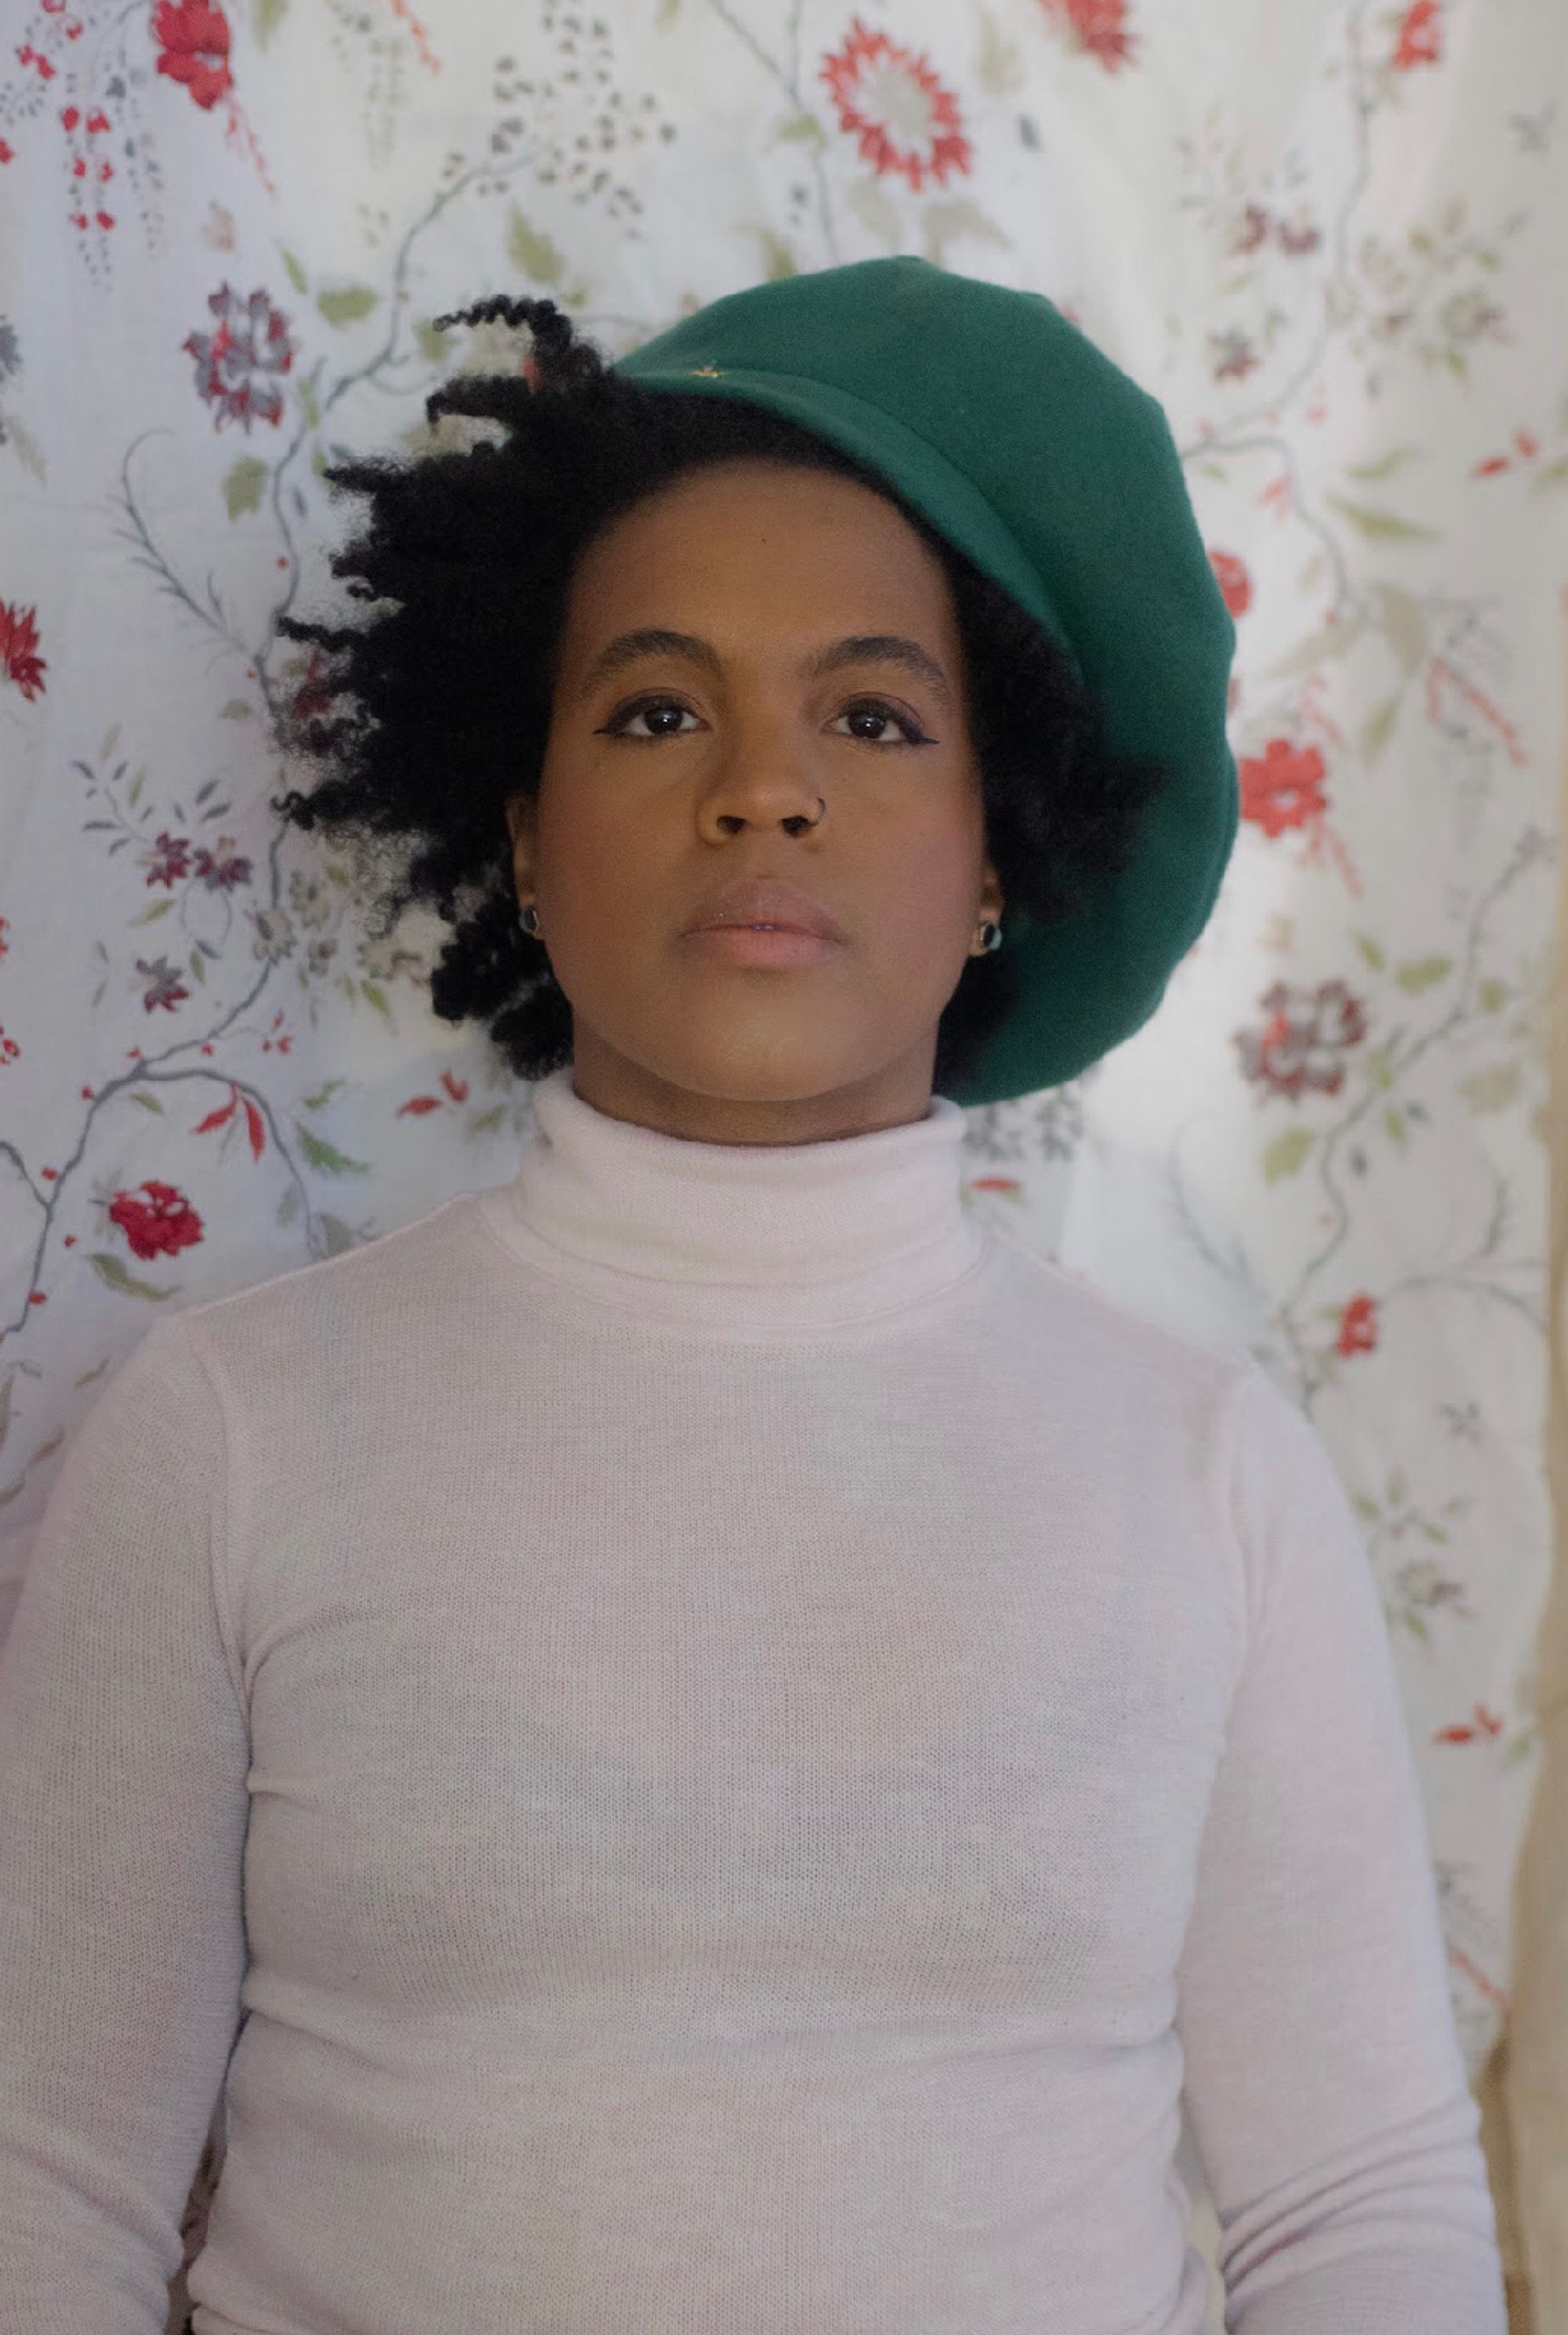 Black woman with a green hat and white sweater.